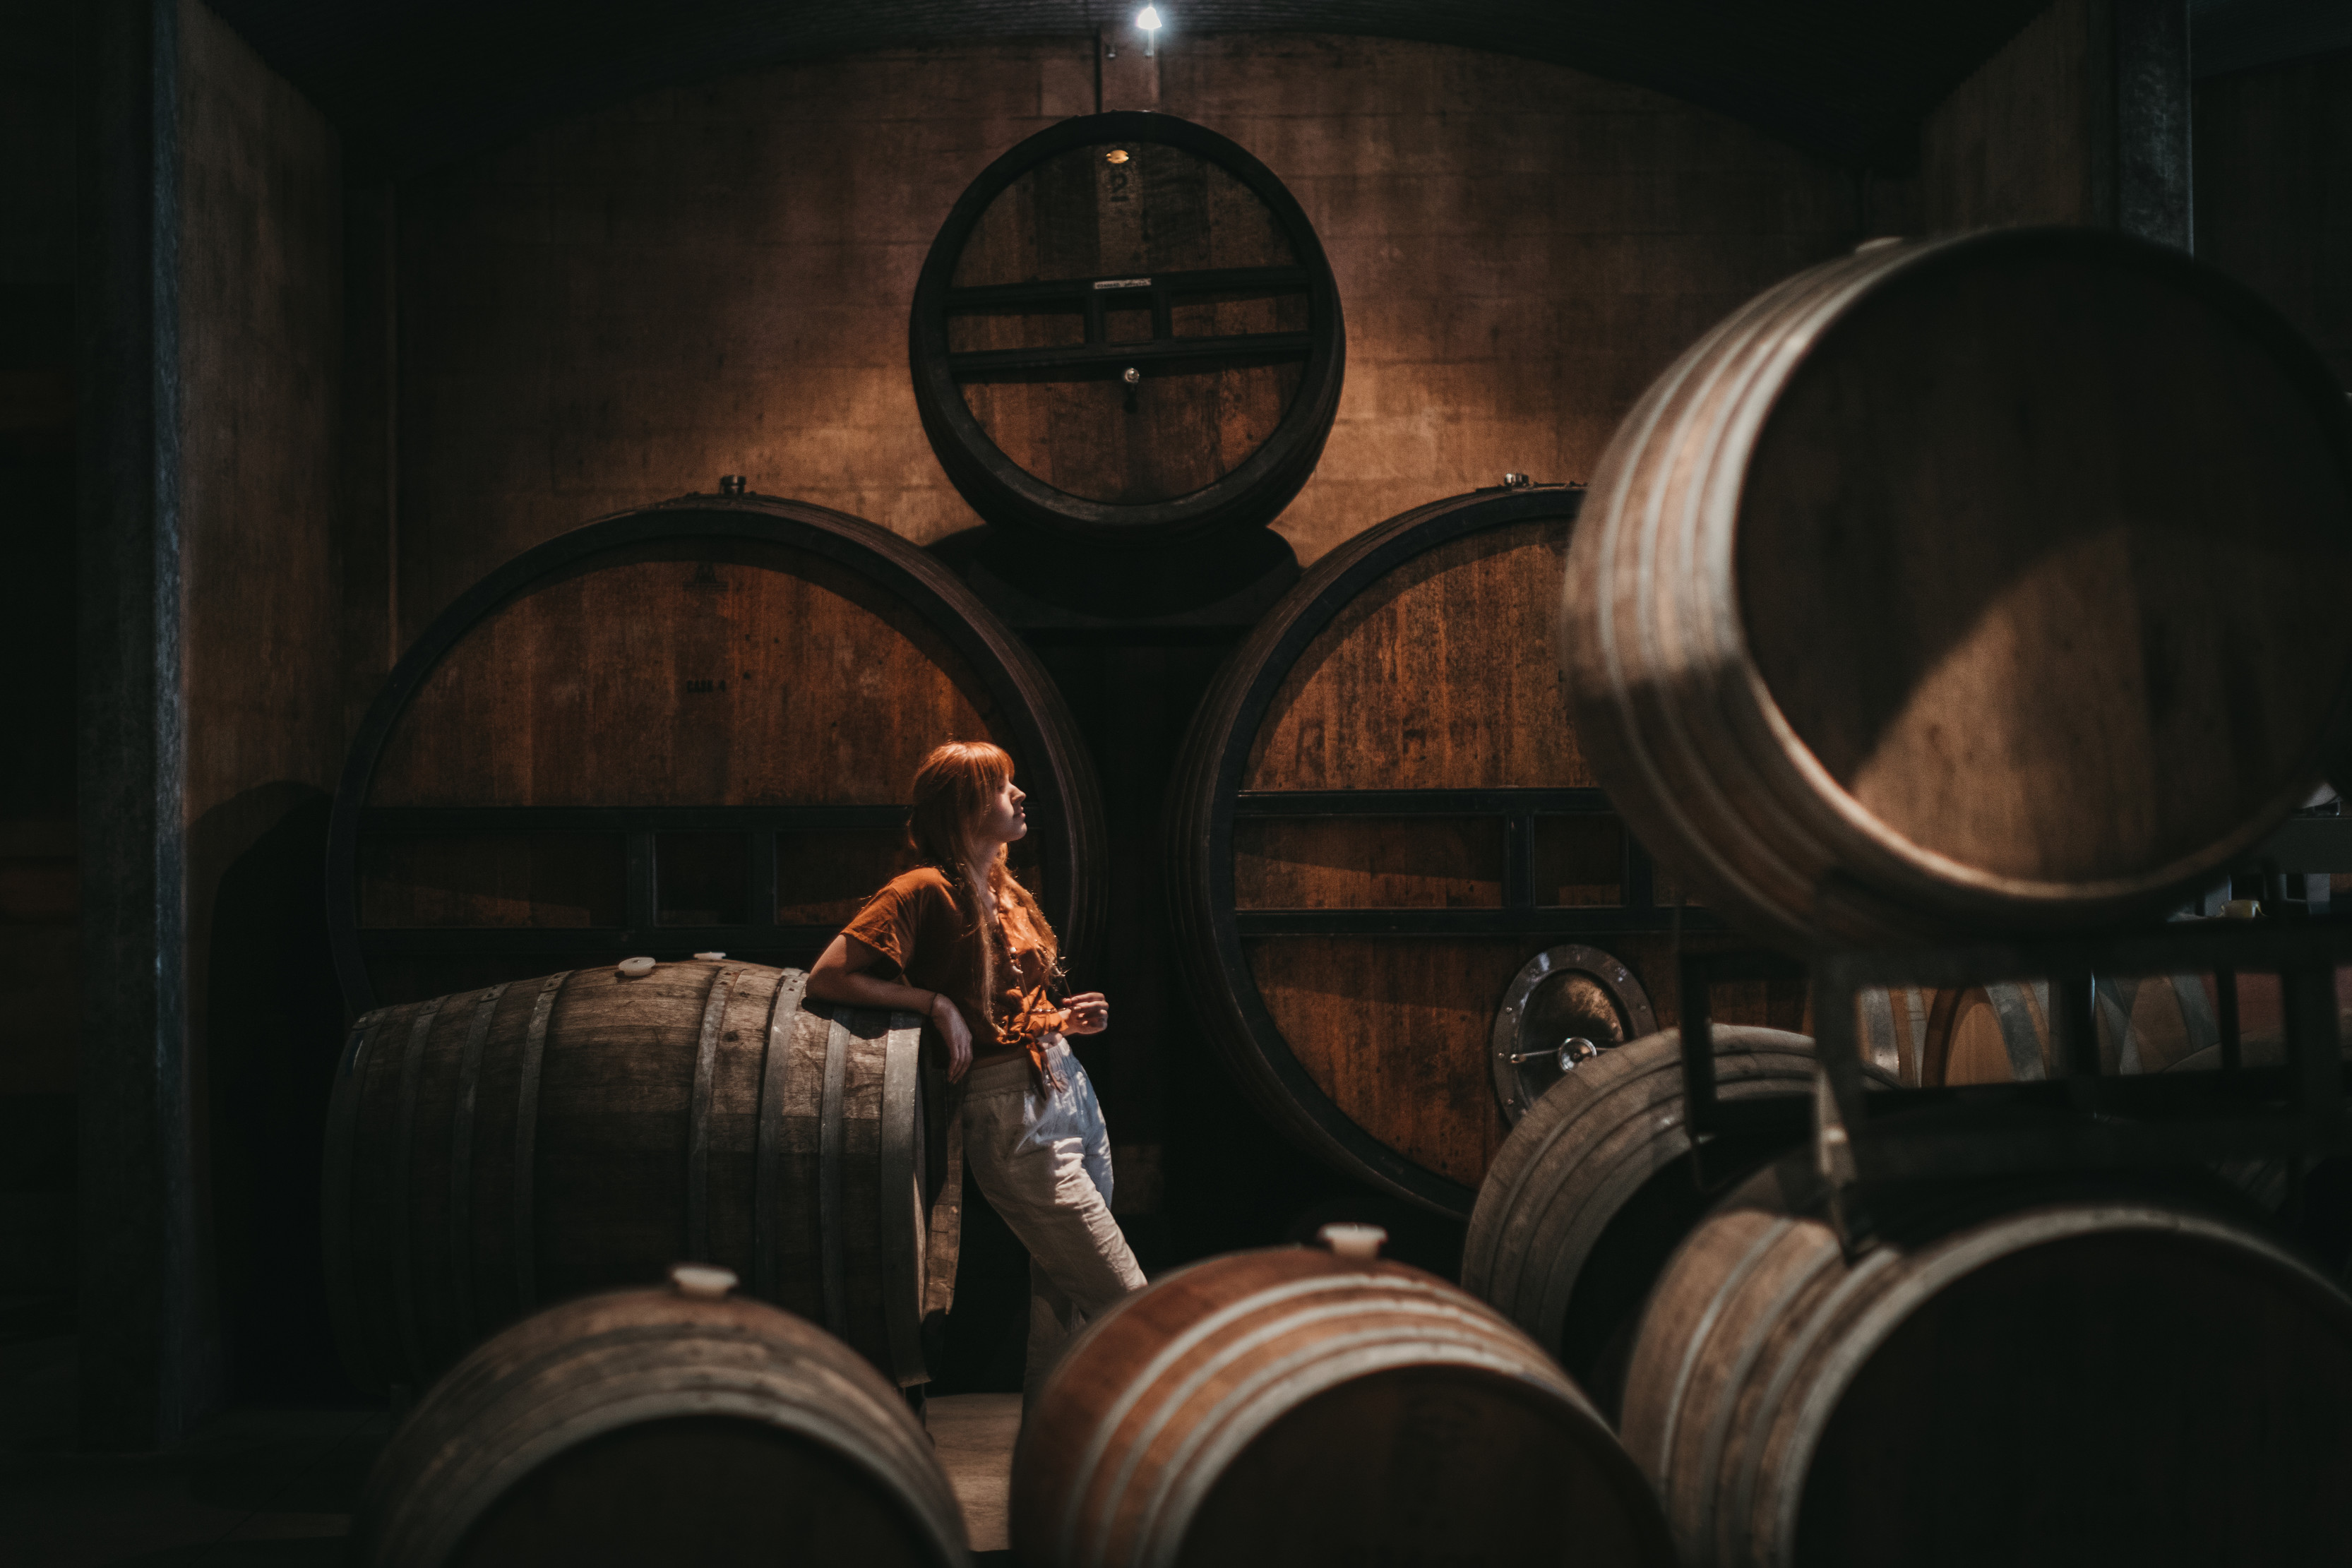 Interior of a woman with red hair surrounded by barrells at Pipers Brook Vineyard.